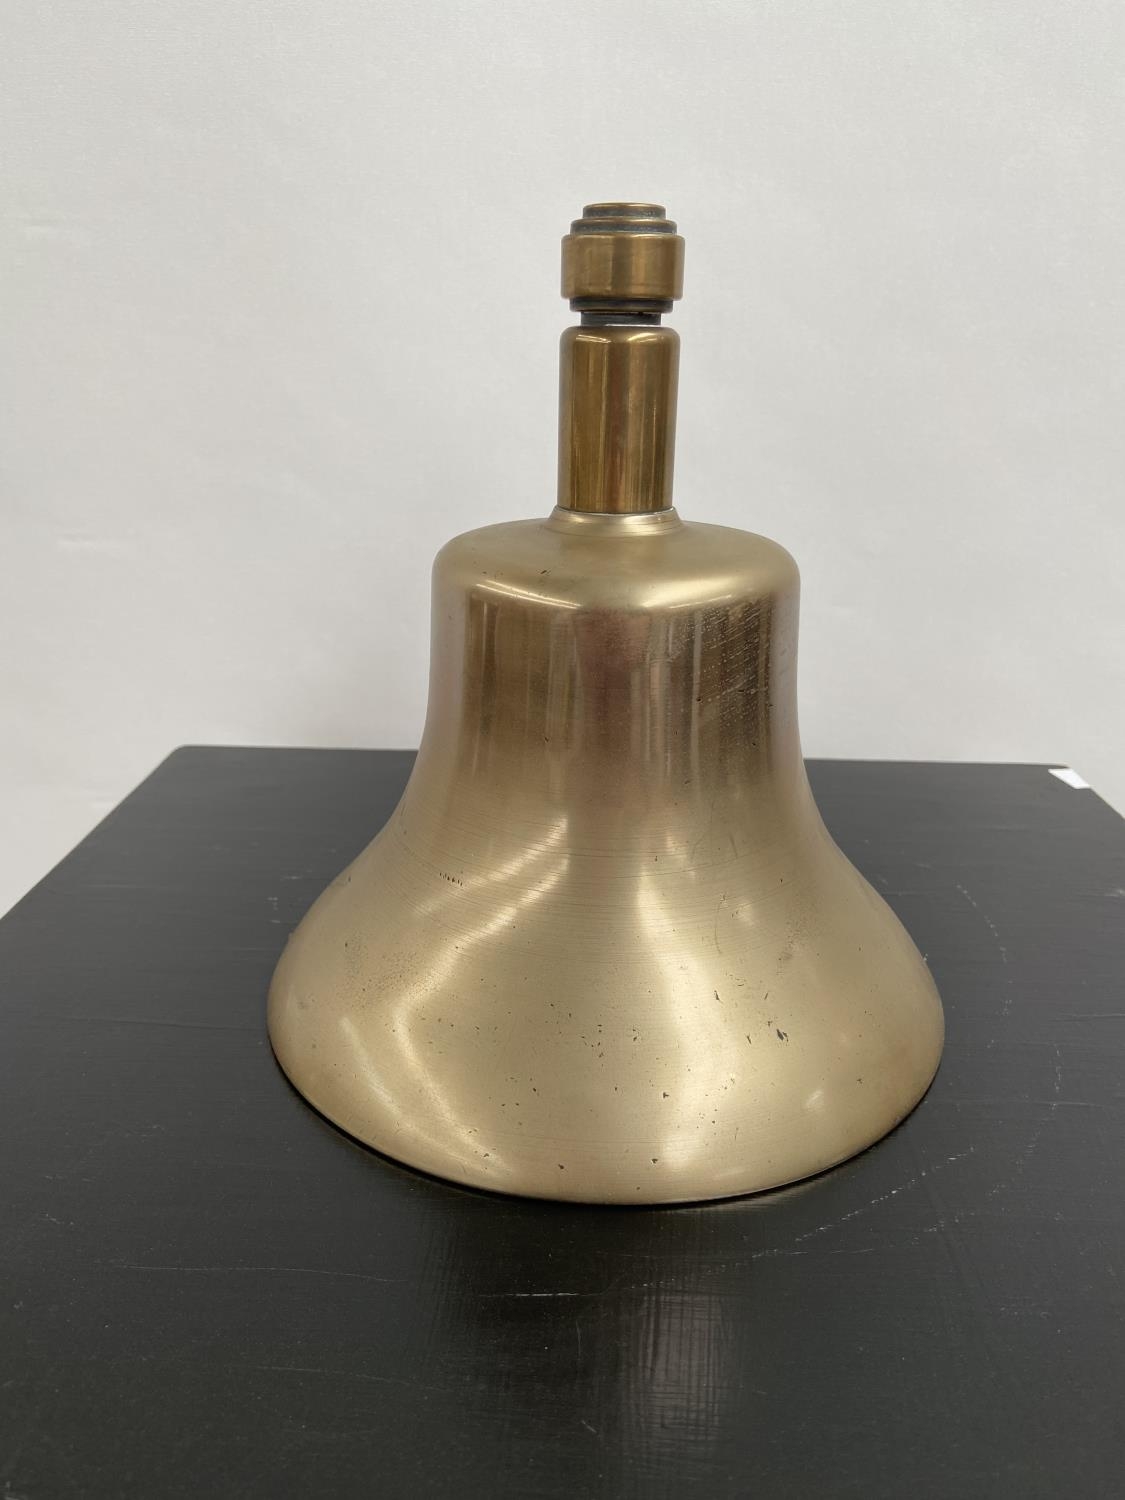 A Heavy antique hand bell. Stamped Greenberg to the inside. [Height 21cm, diameter 19cm]